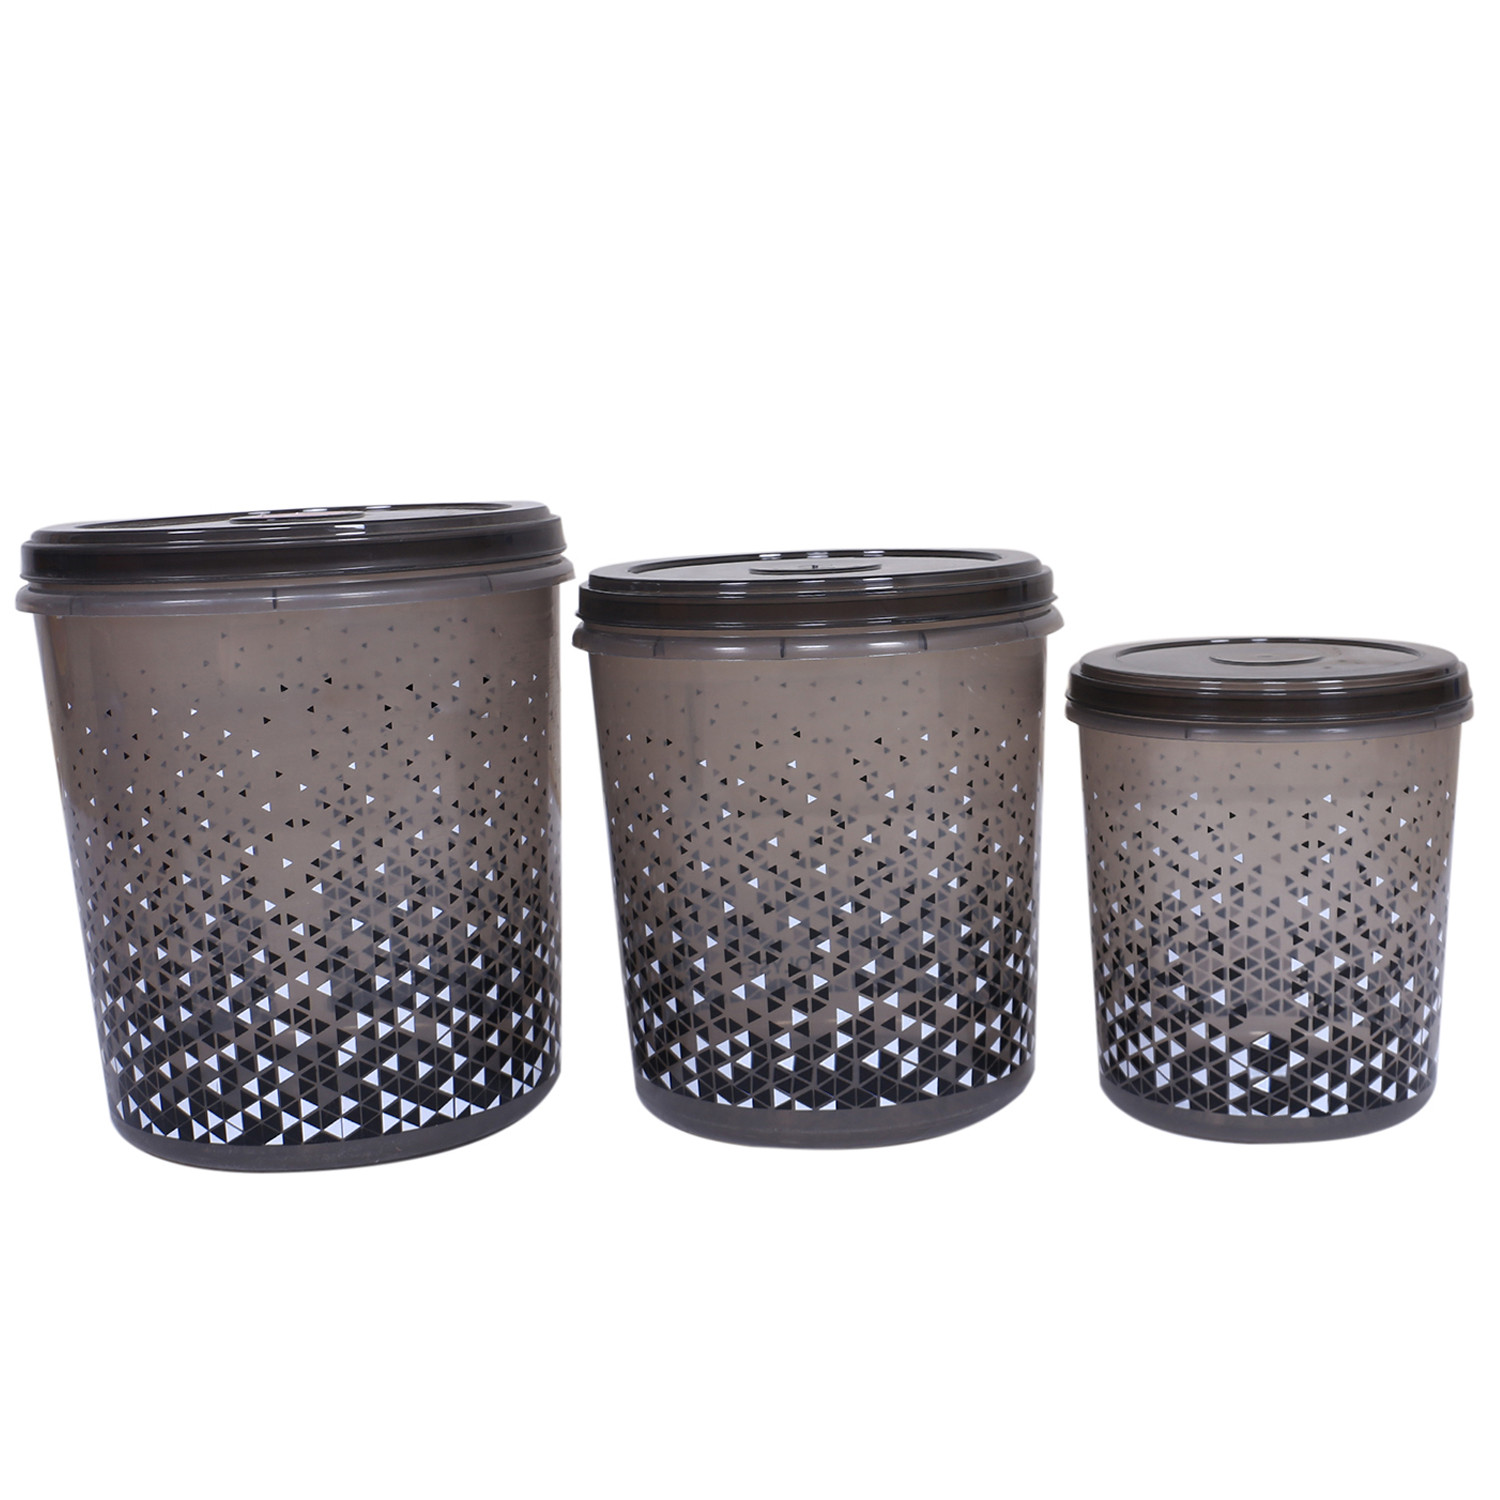 Kuber Industries Plastic Container|Container For Kitchen Storage Set|Air Tight Container|Tinted Printed 5 Litre,7 Litre,10 Litre Containers|Set of 3 (Grey)